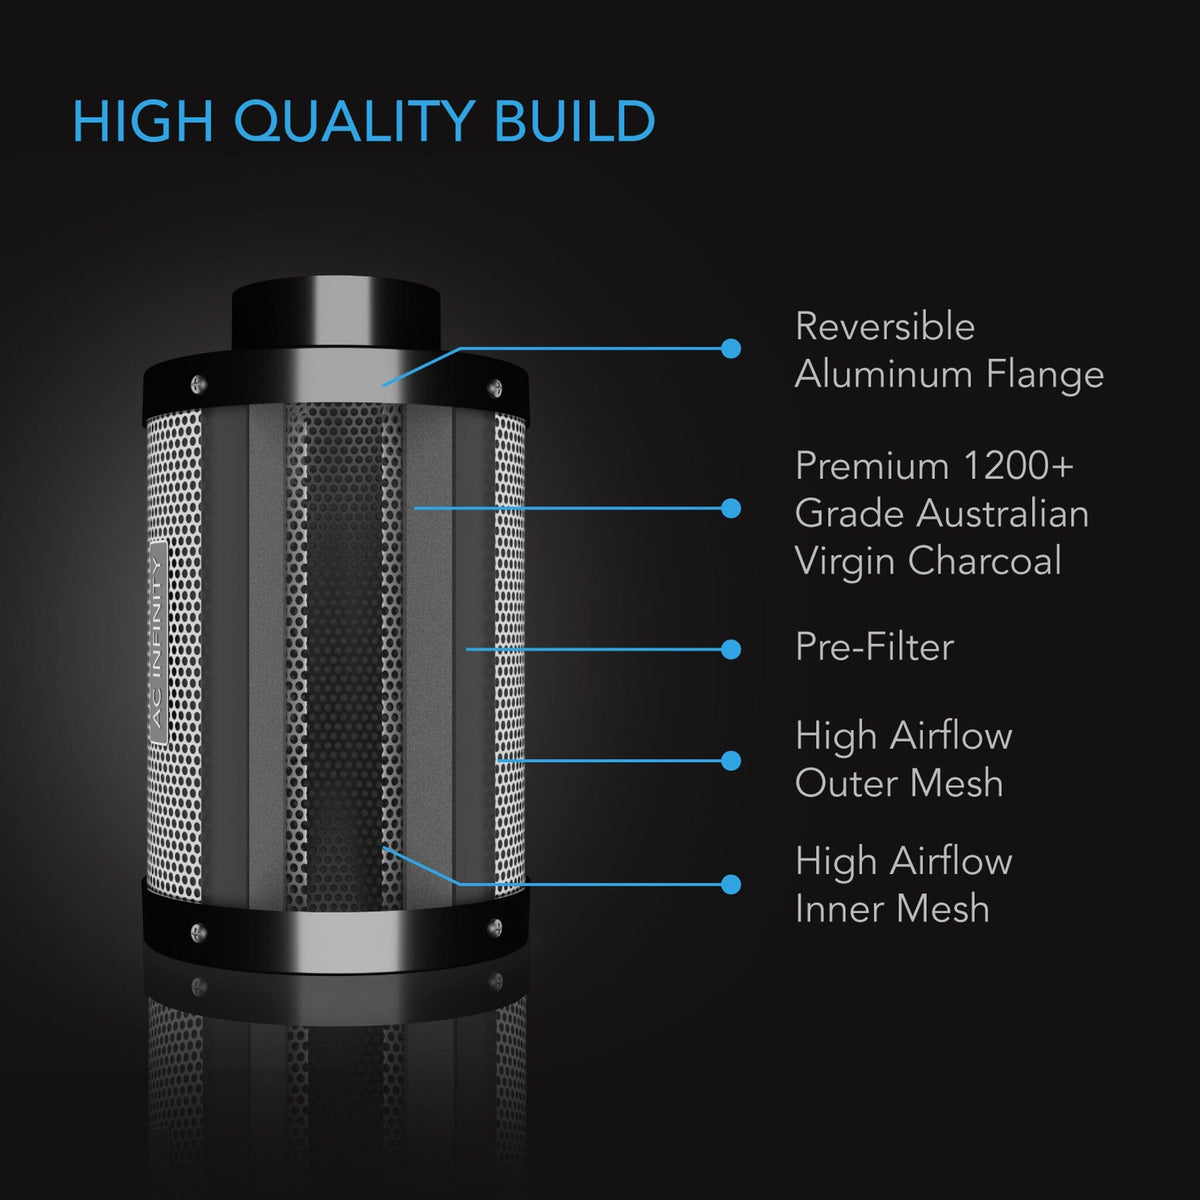 AC Infinity filters build with high quality in mind